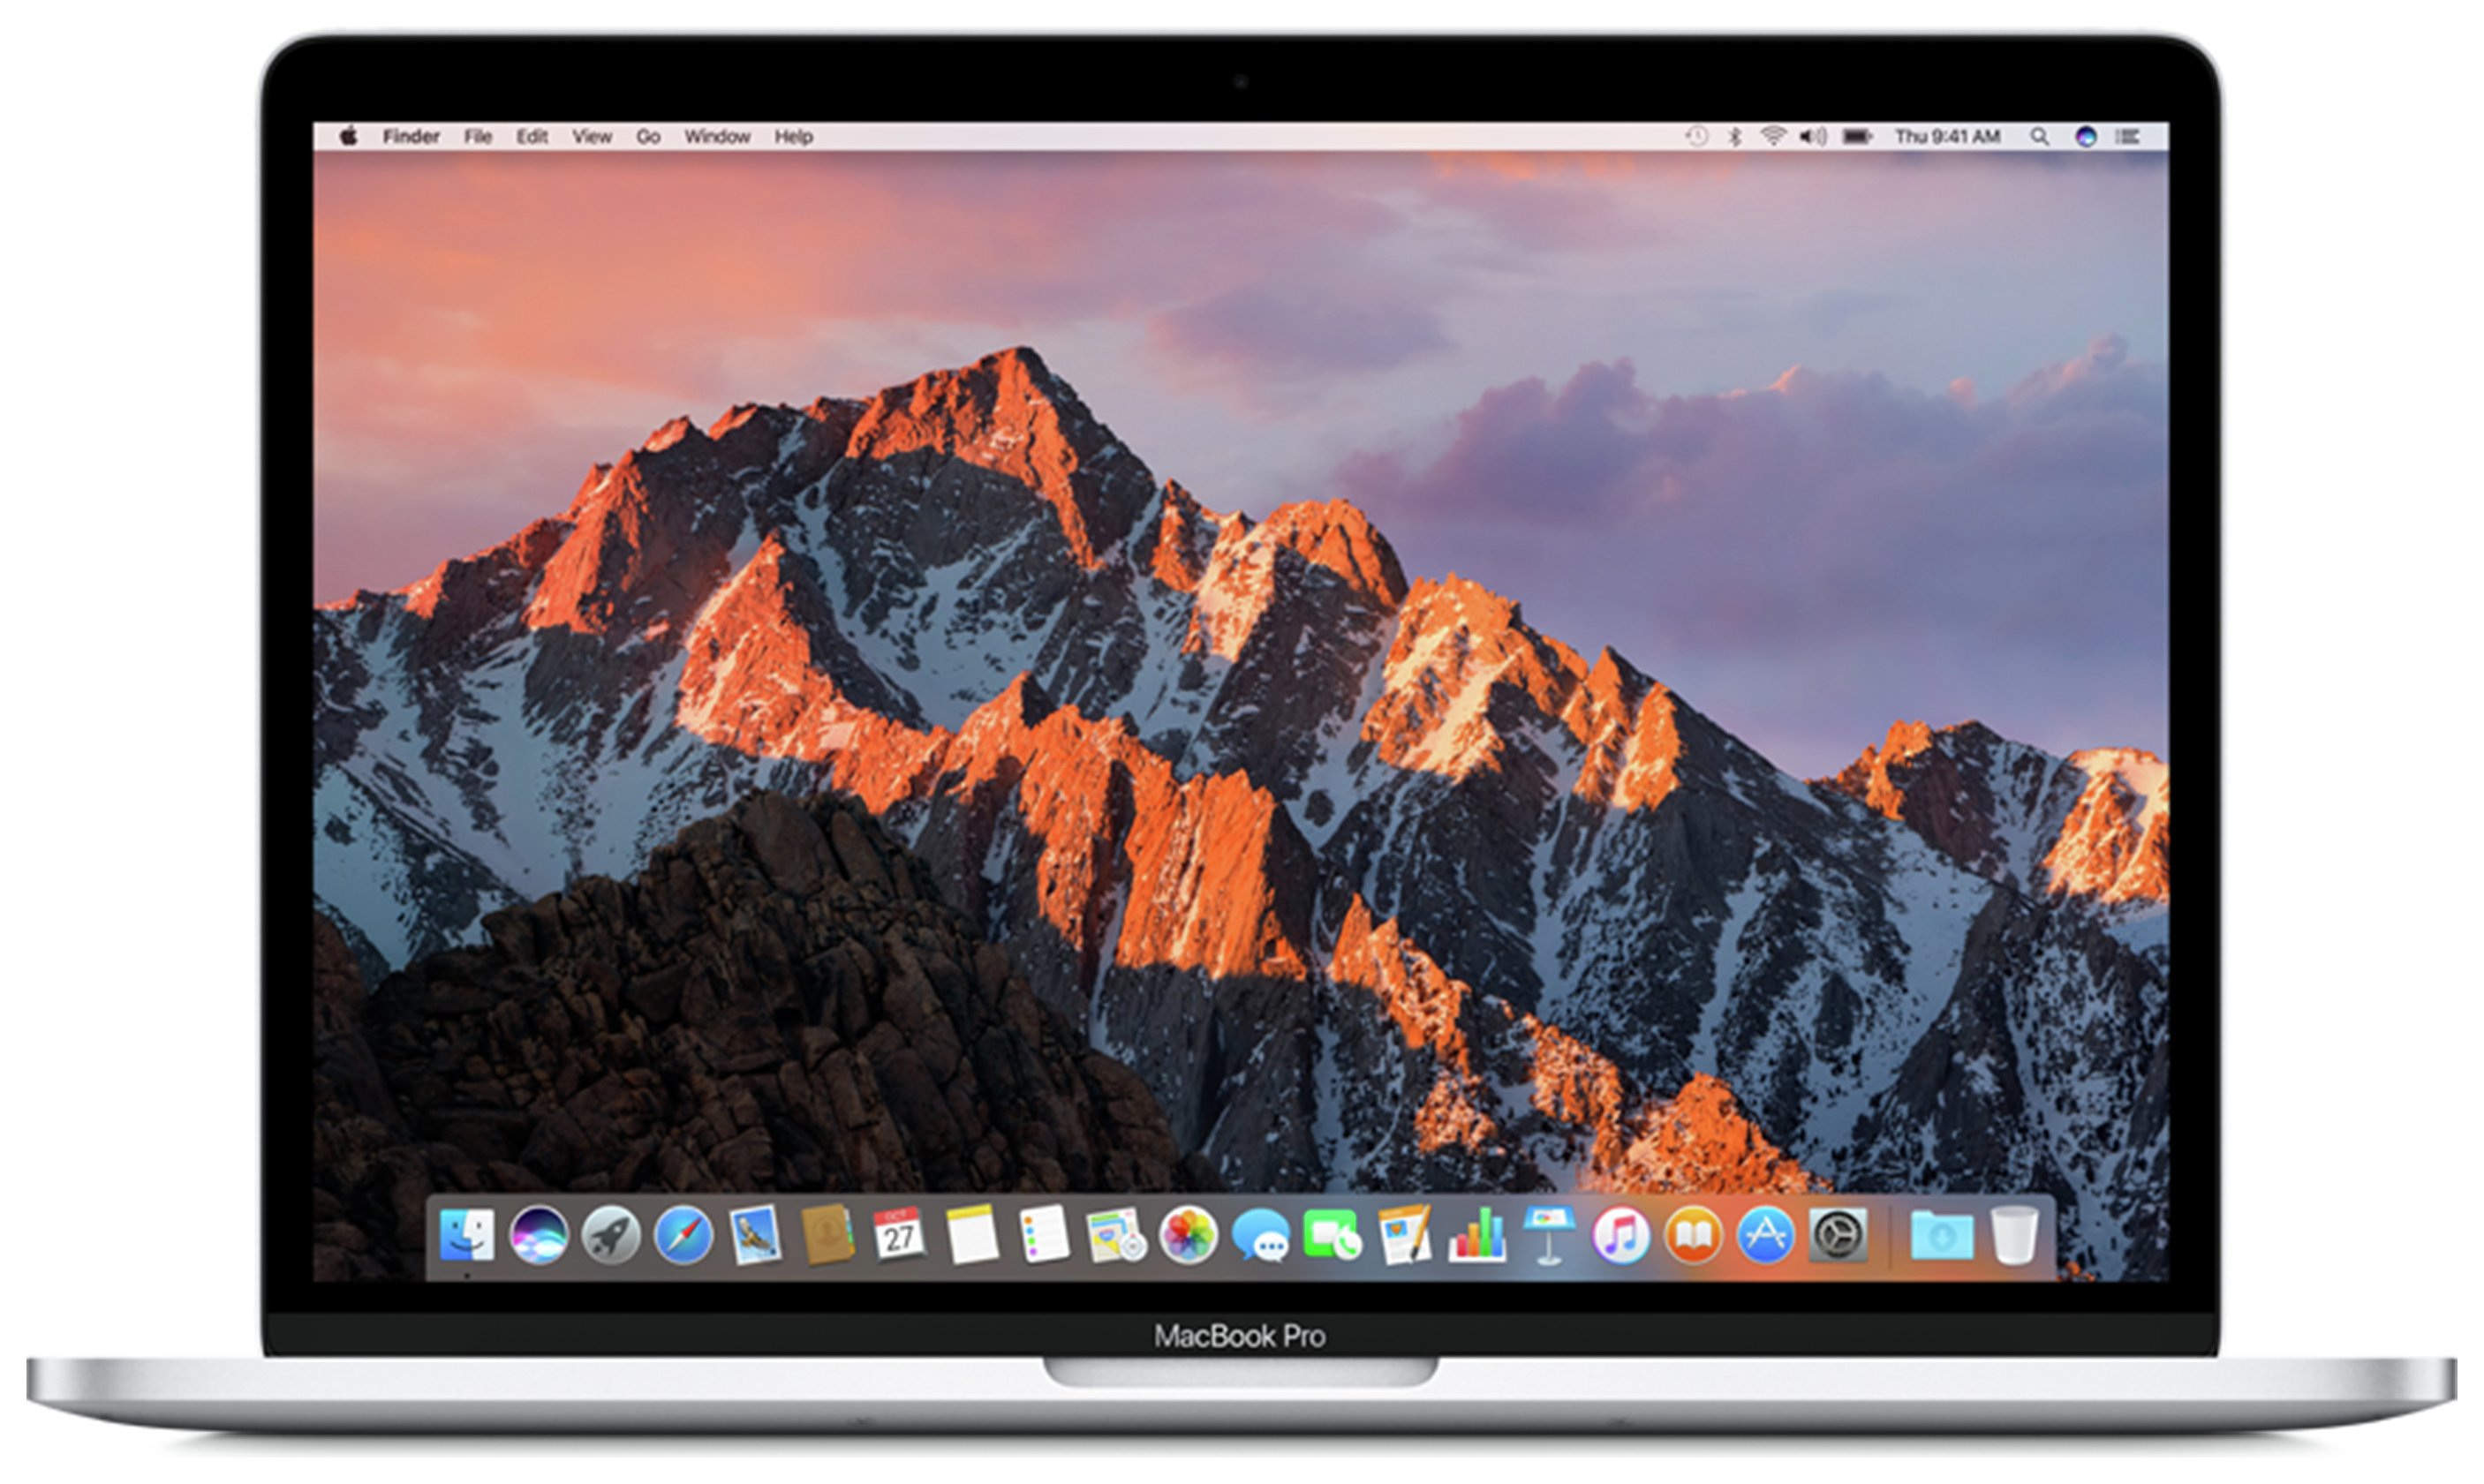 Apple MacBook Pro 2016 13.3 Inch Ci5 8GB 256GB - Space Grey. Review